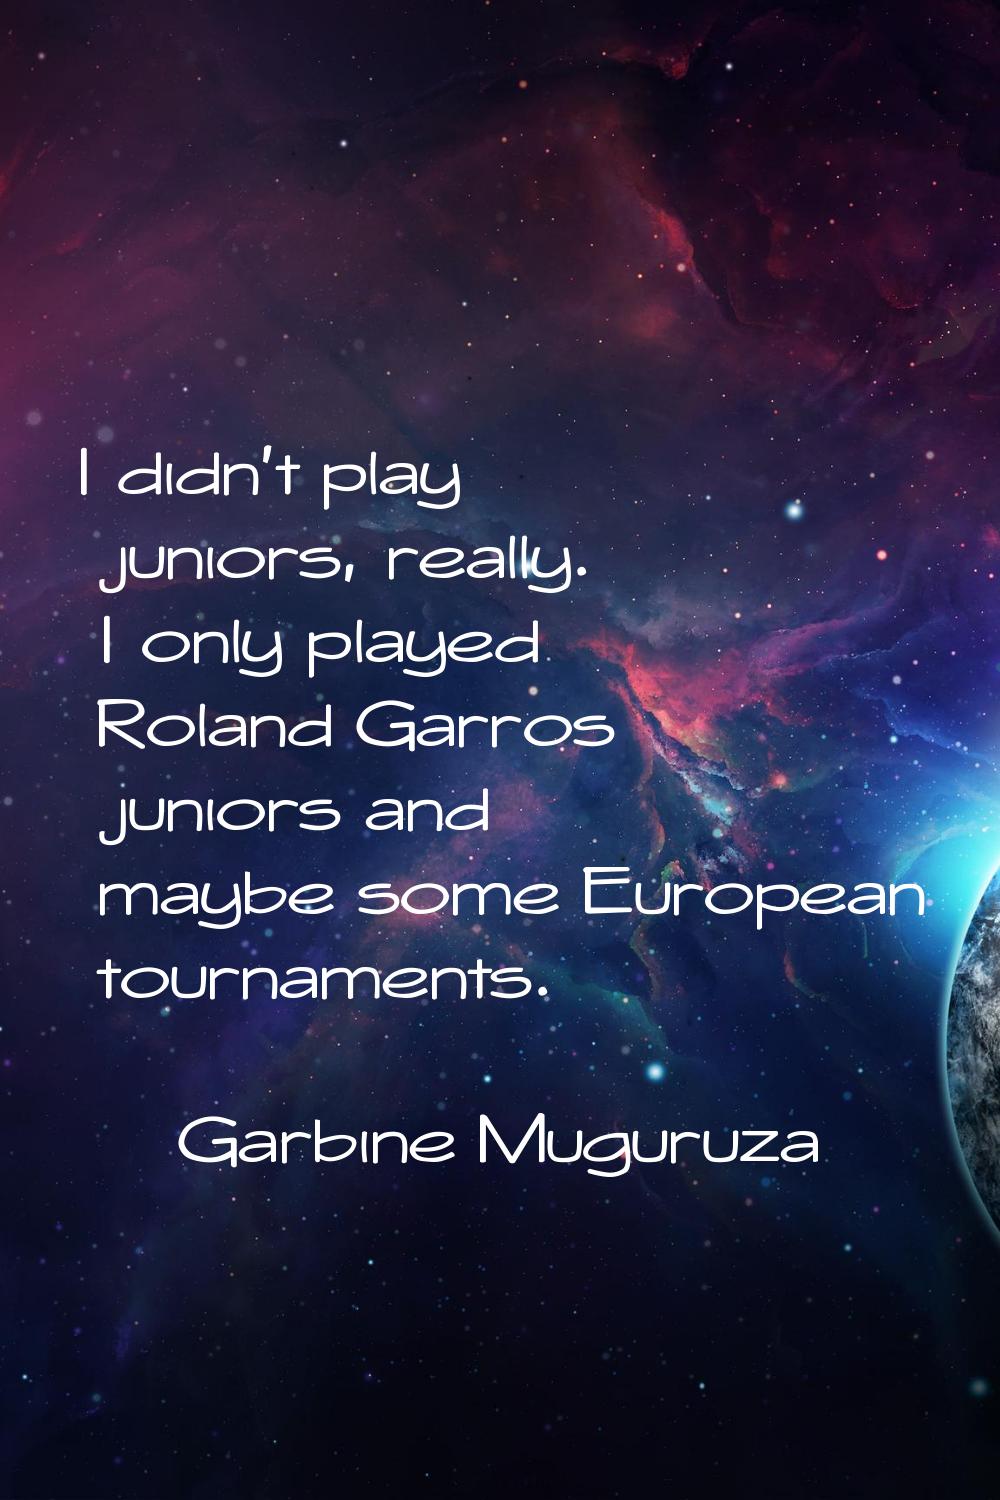 I didn't play juniors, really. I only played Roland Garros juniors and maybe some European tourname